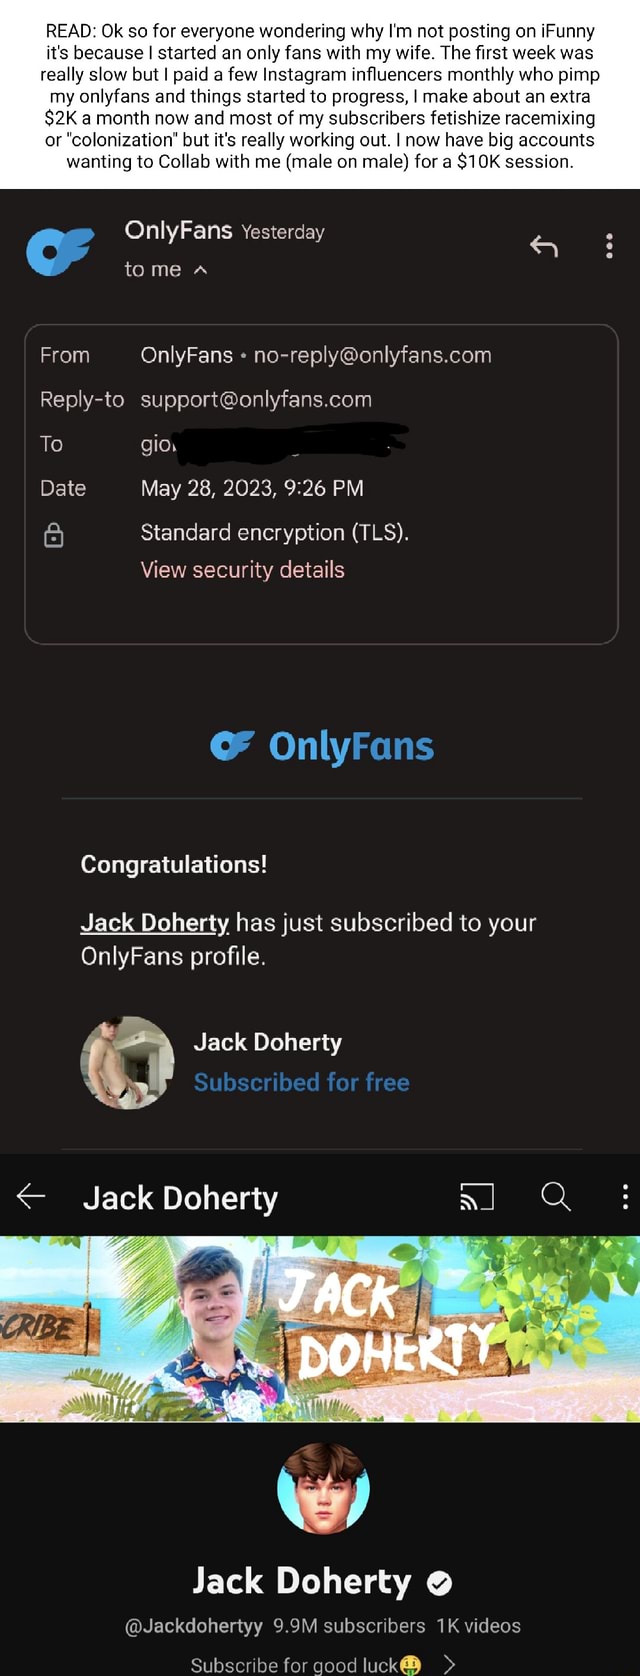 READ: Ok so for everyone wondering why Im not posting on iFunny its  because I started an only fans with my wife. The first week was really slow  but I paid a